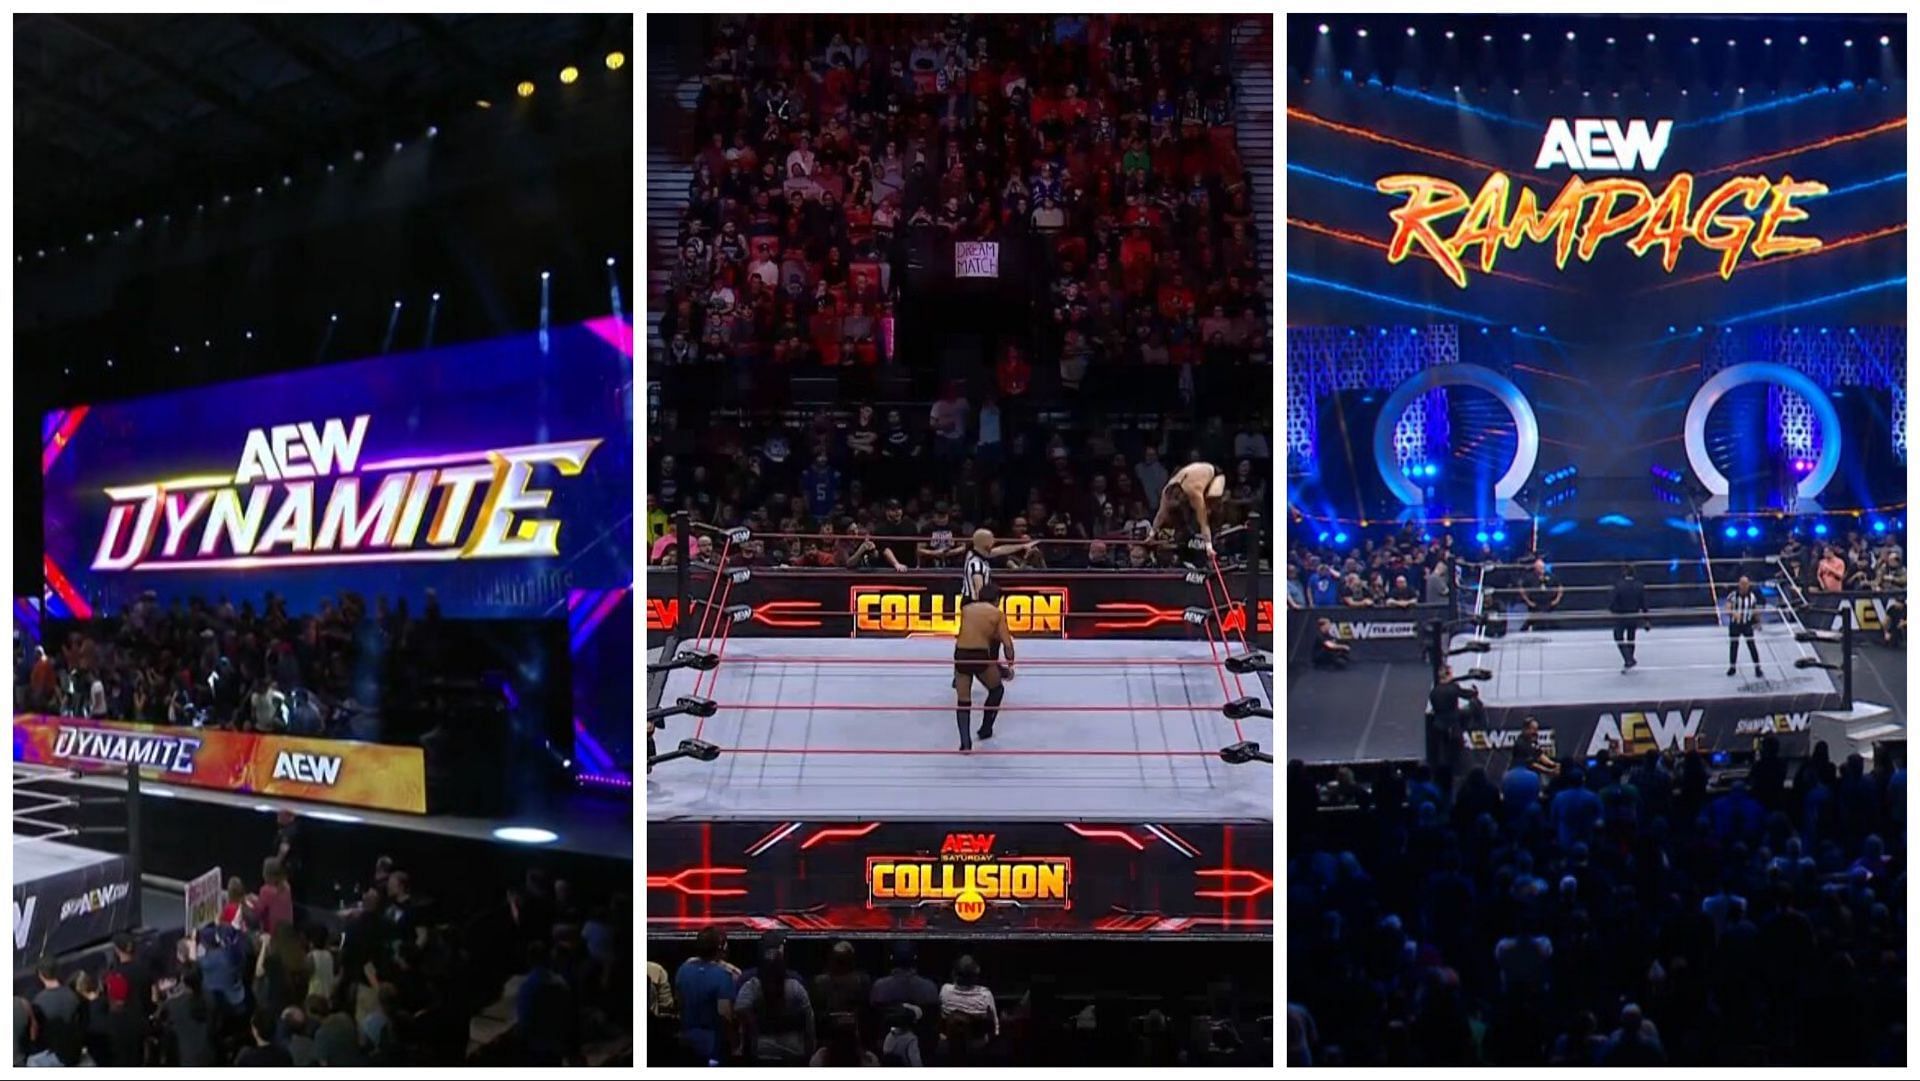 A look at the AEW setups for Dynamite, Rampage, and Collision